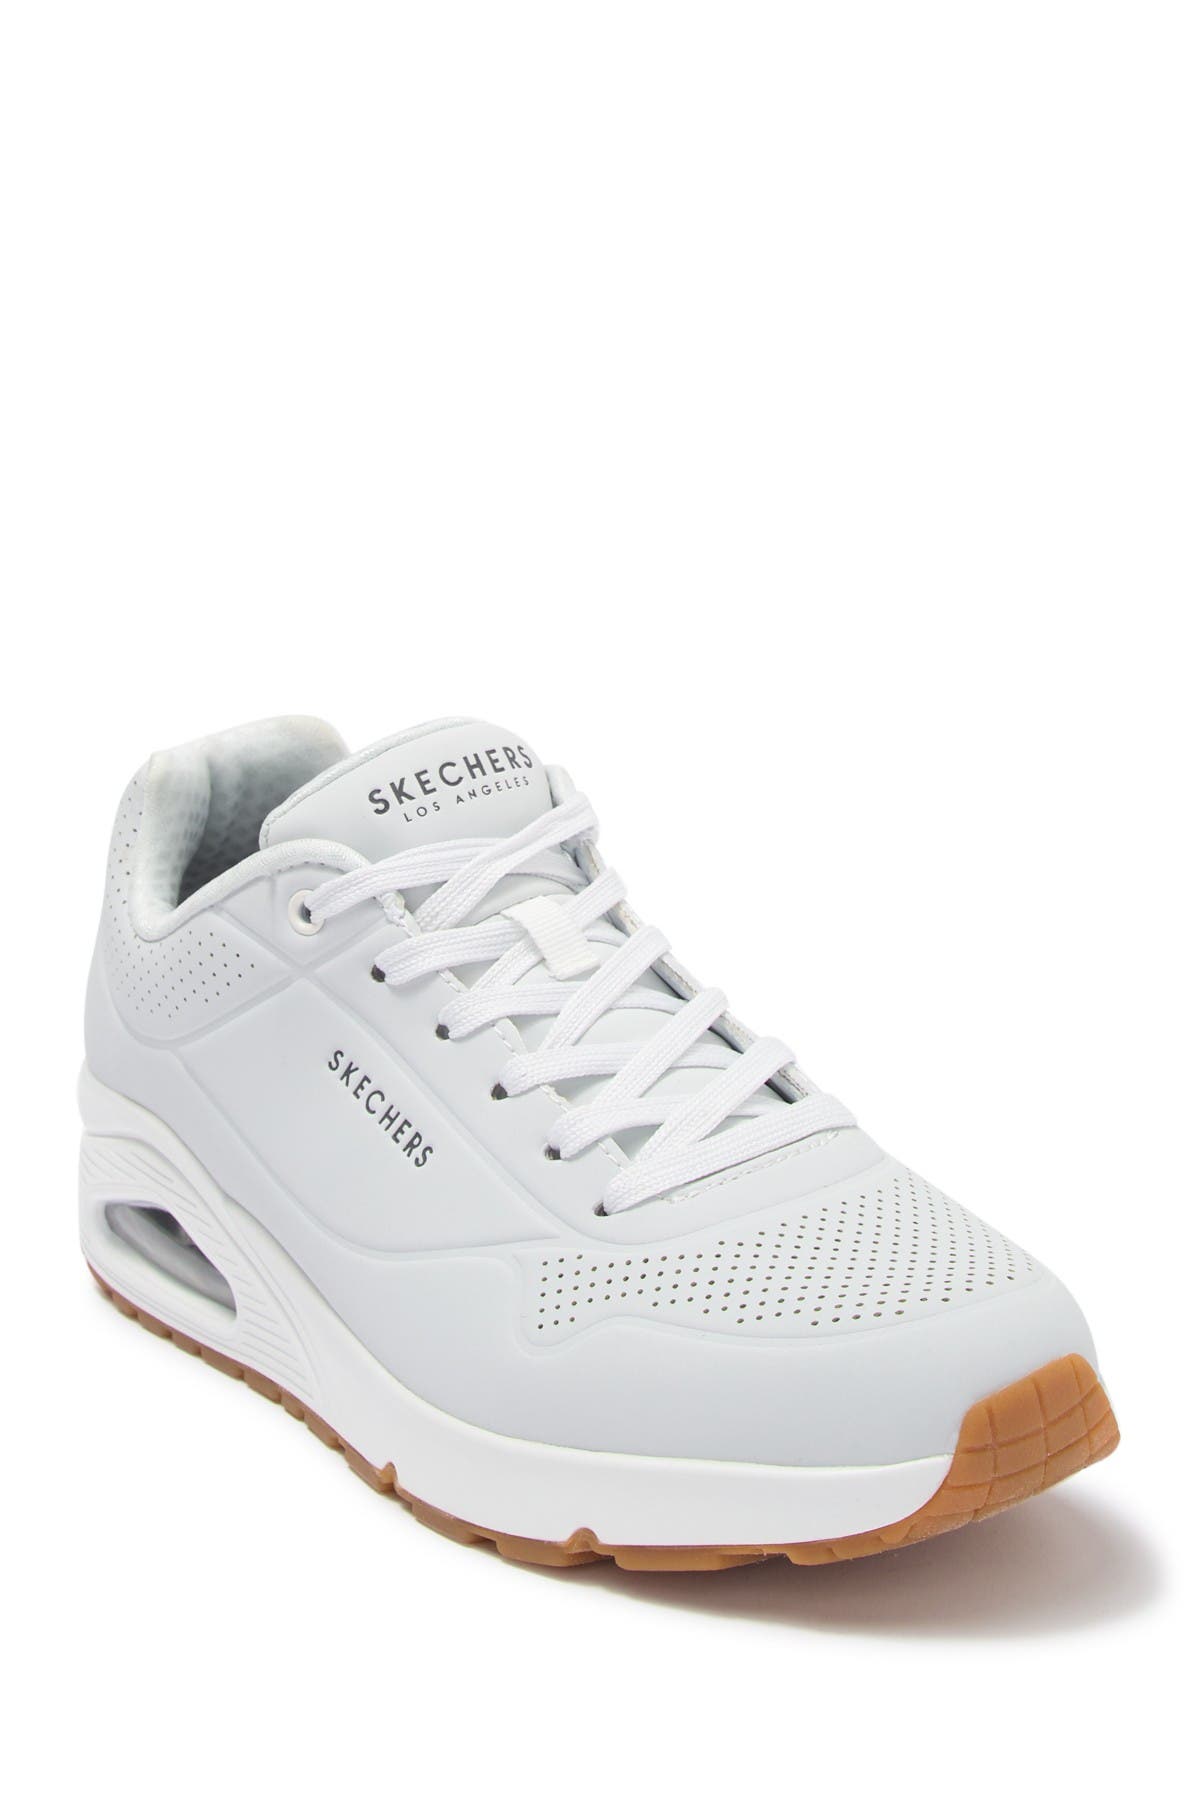 skechers sport uno stand on air